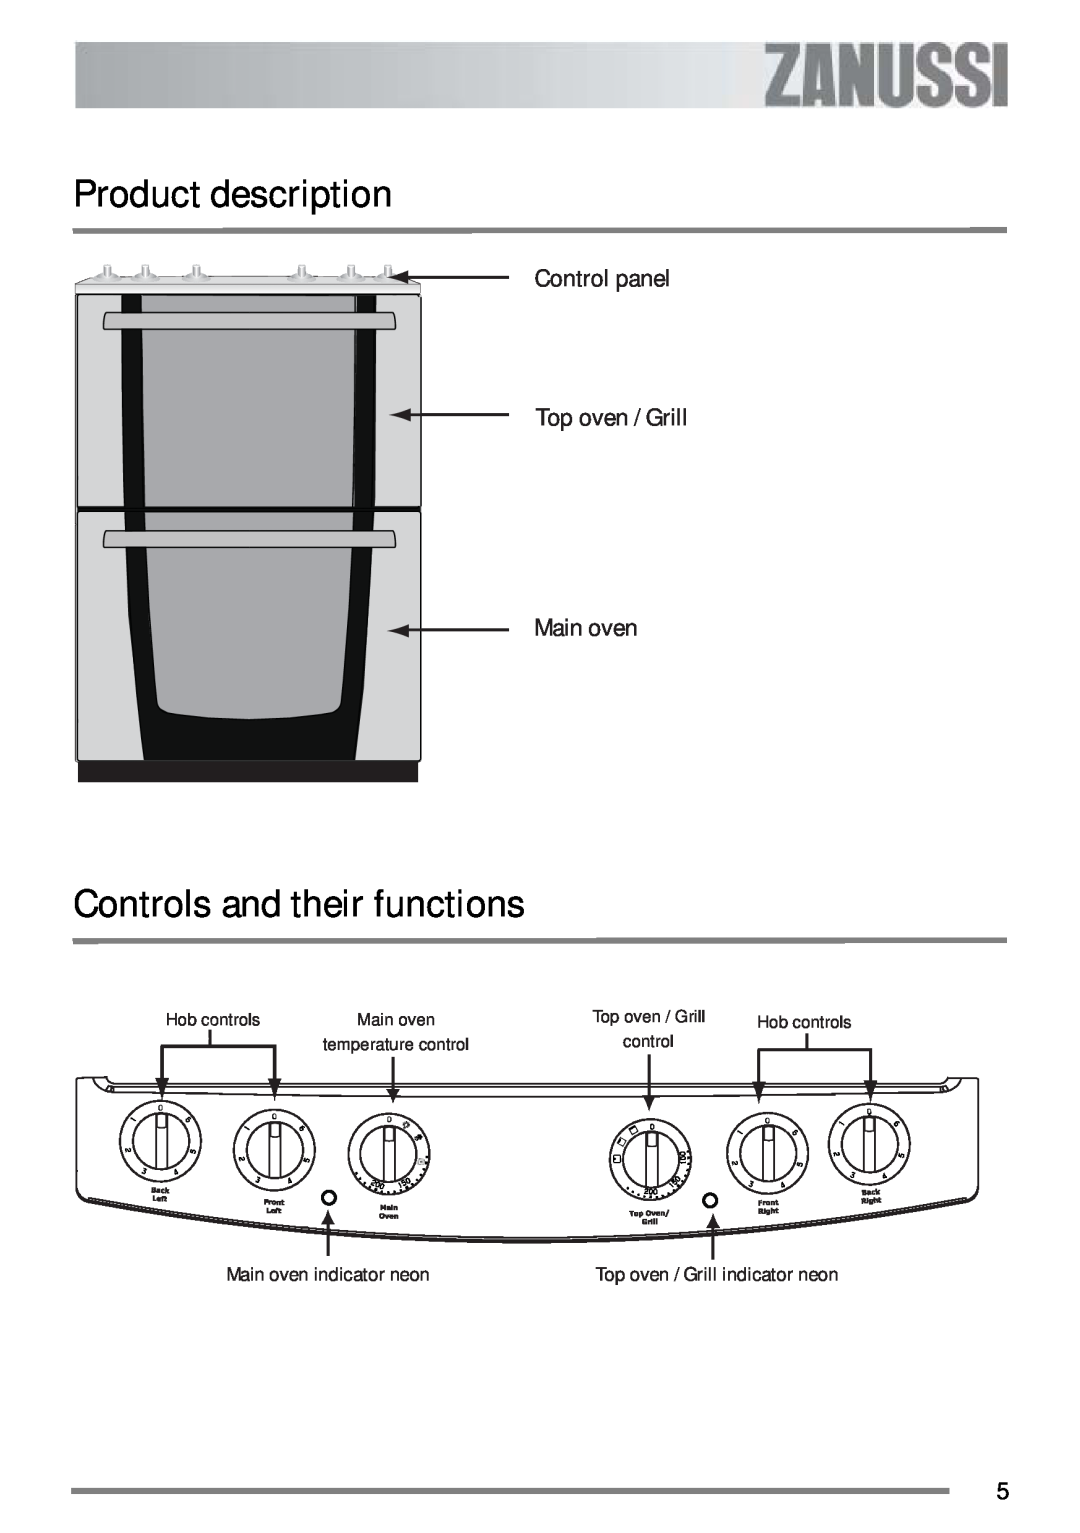 Zanussi ZKC 6000W Product description, Controls and their functions, Control panel Top oven / Grill Main oven, control 